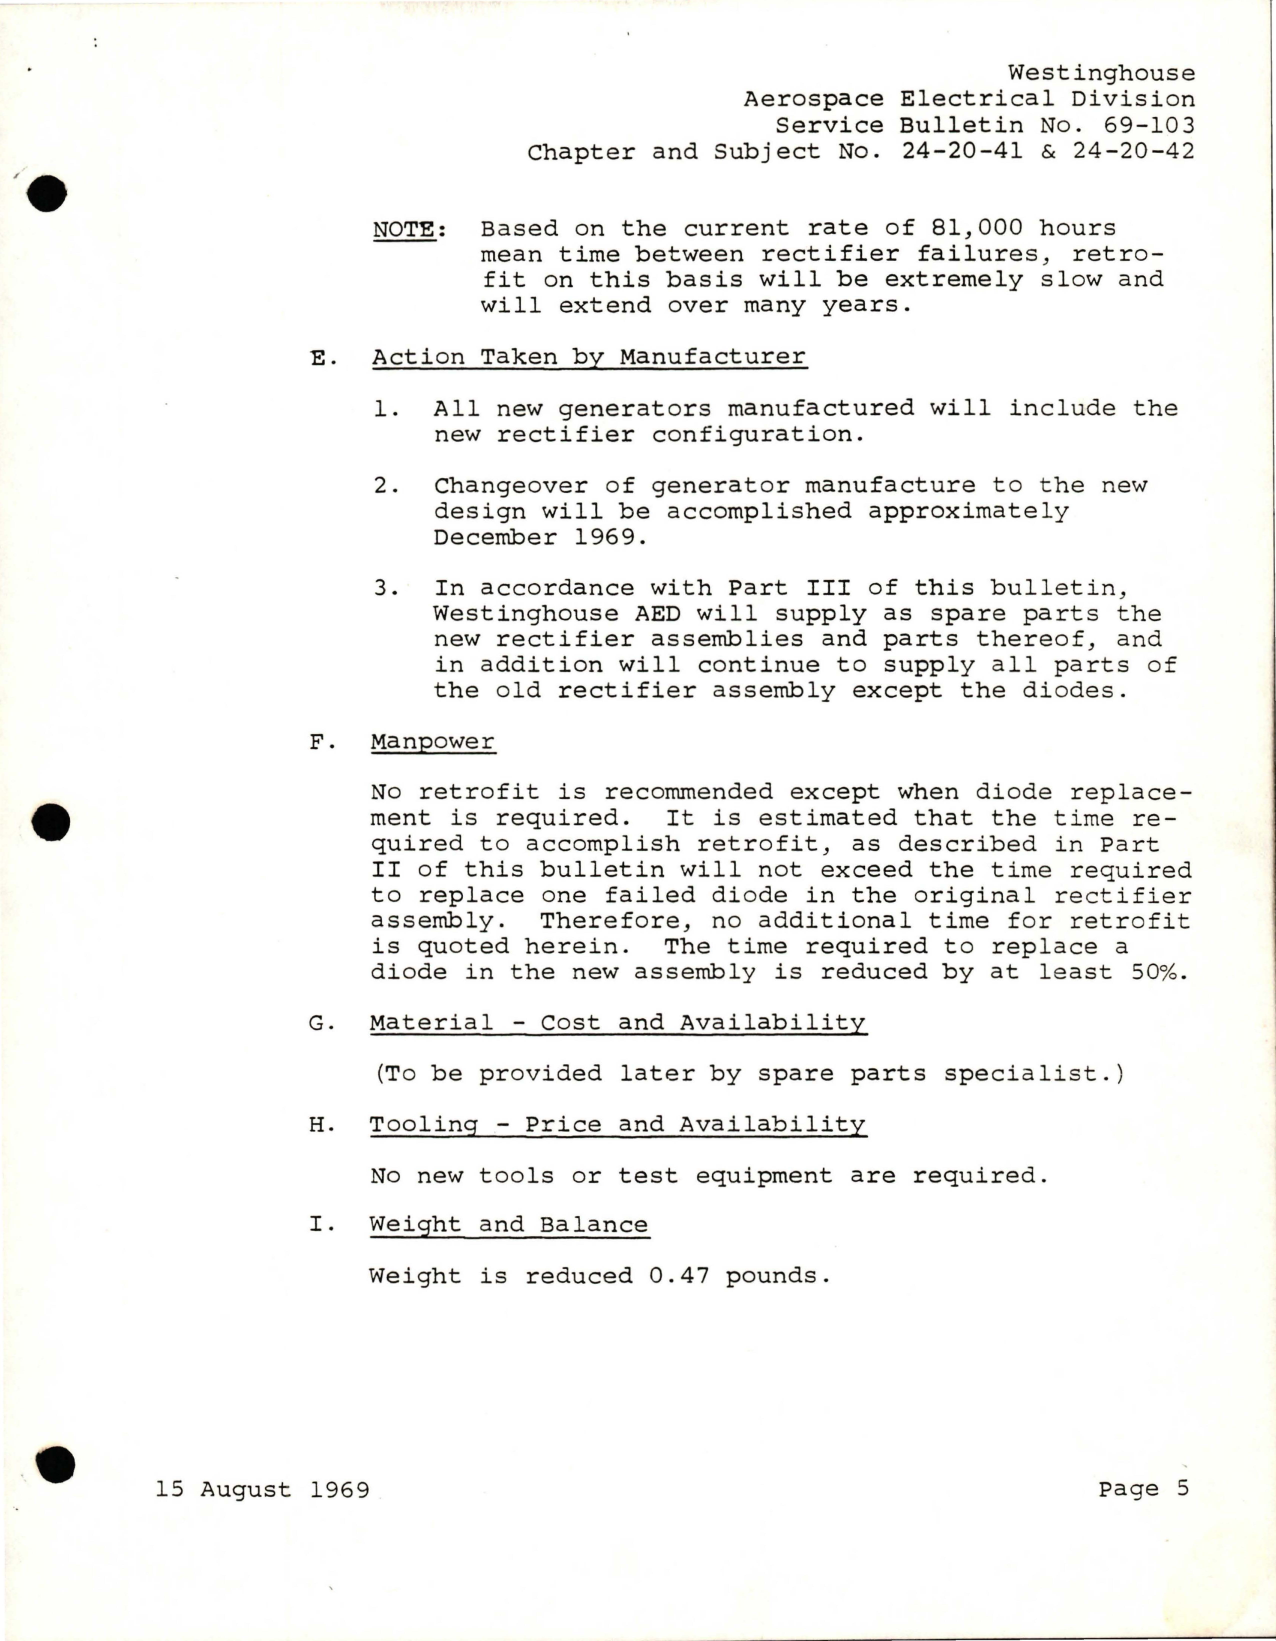 Sample page 5 from AirCorps Library document: Introduction of Improved Rotating Rectifier Assembly - Part 943D367-1